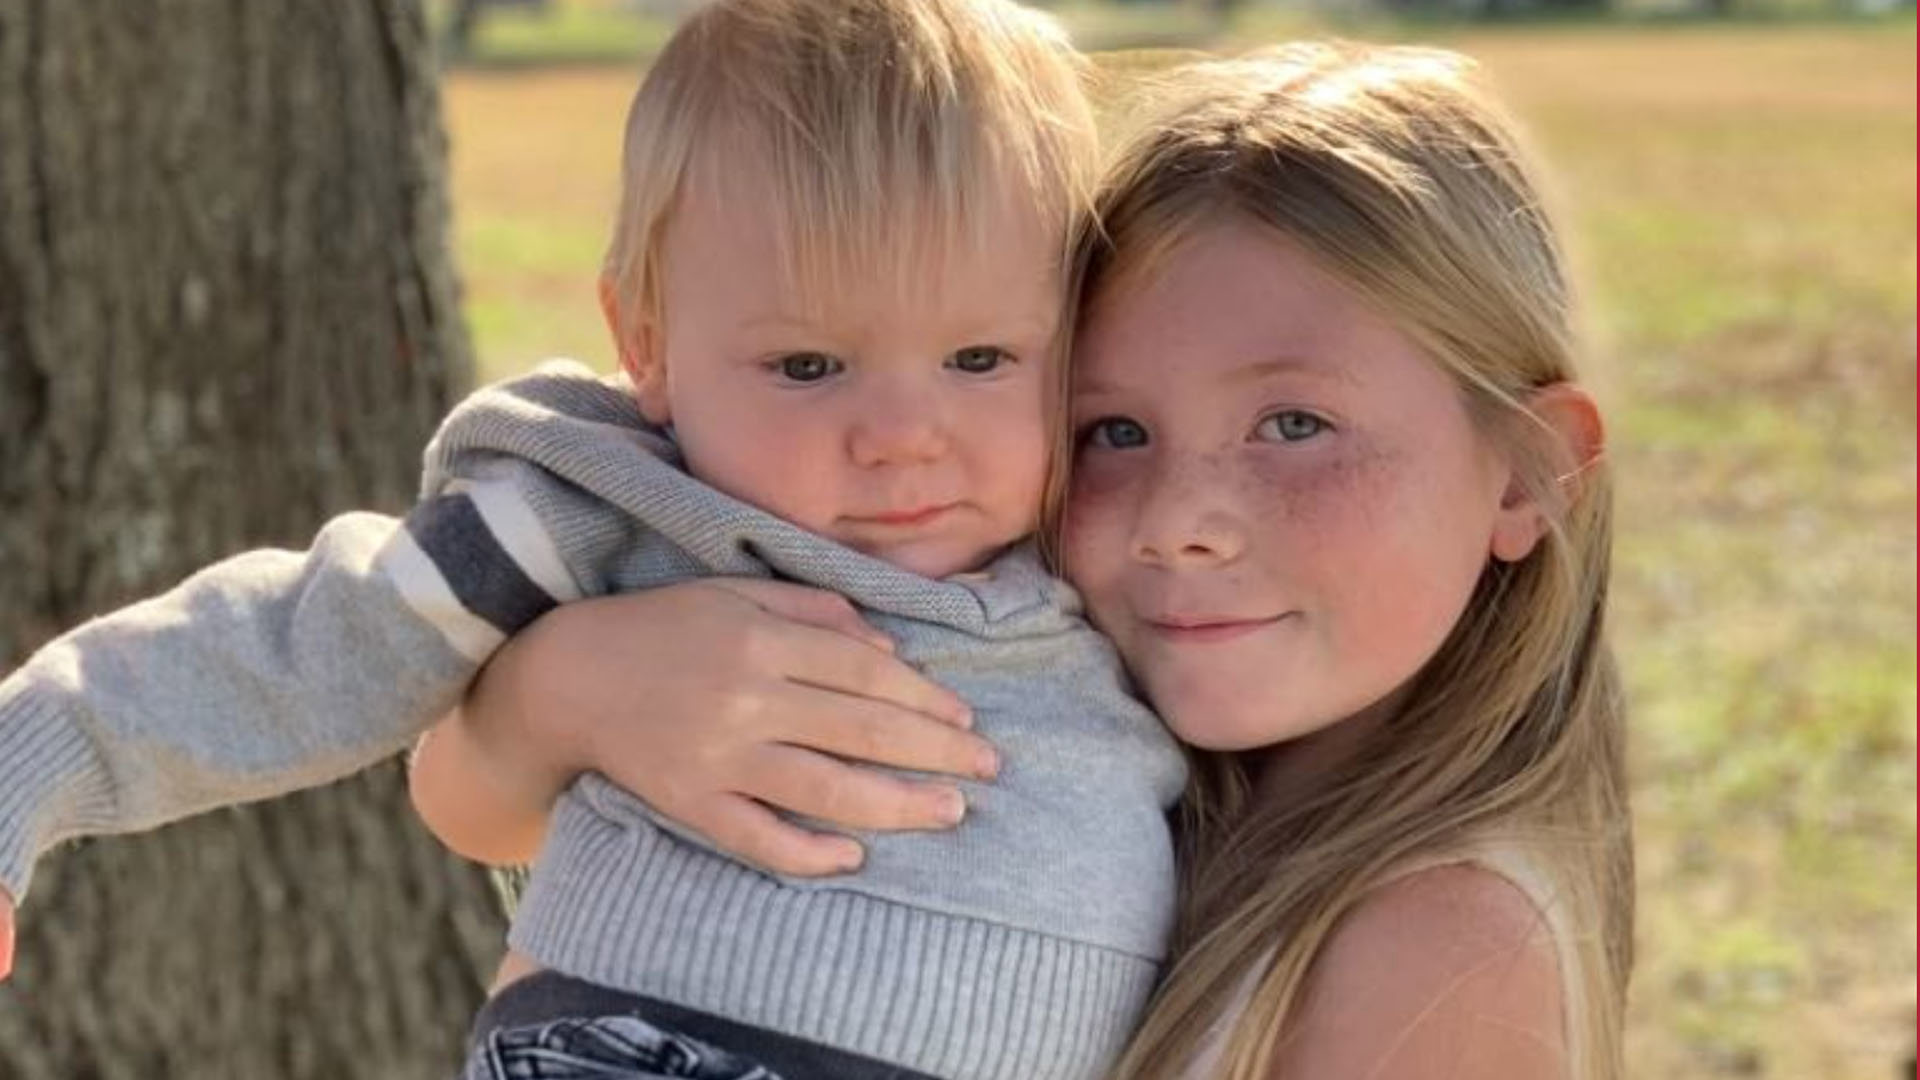 A day after authorities said a mother killed her two children, a community was trying to process what happened and look for ways to support the children's families.